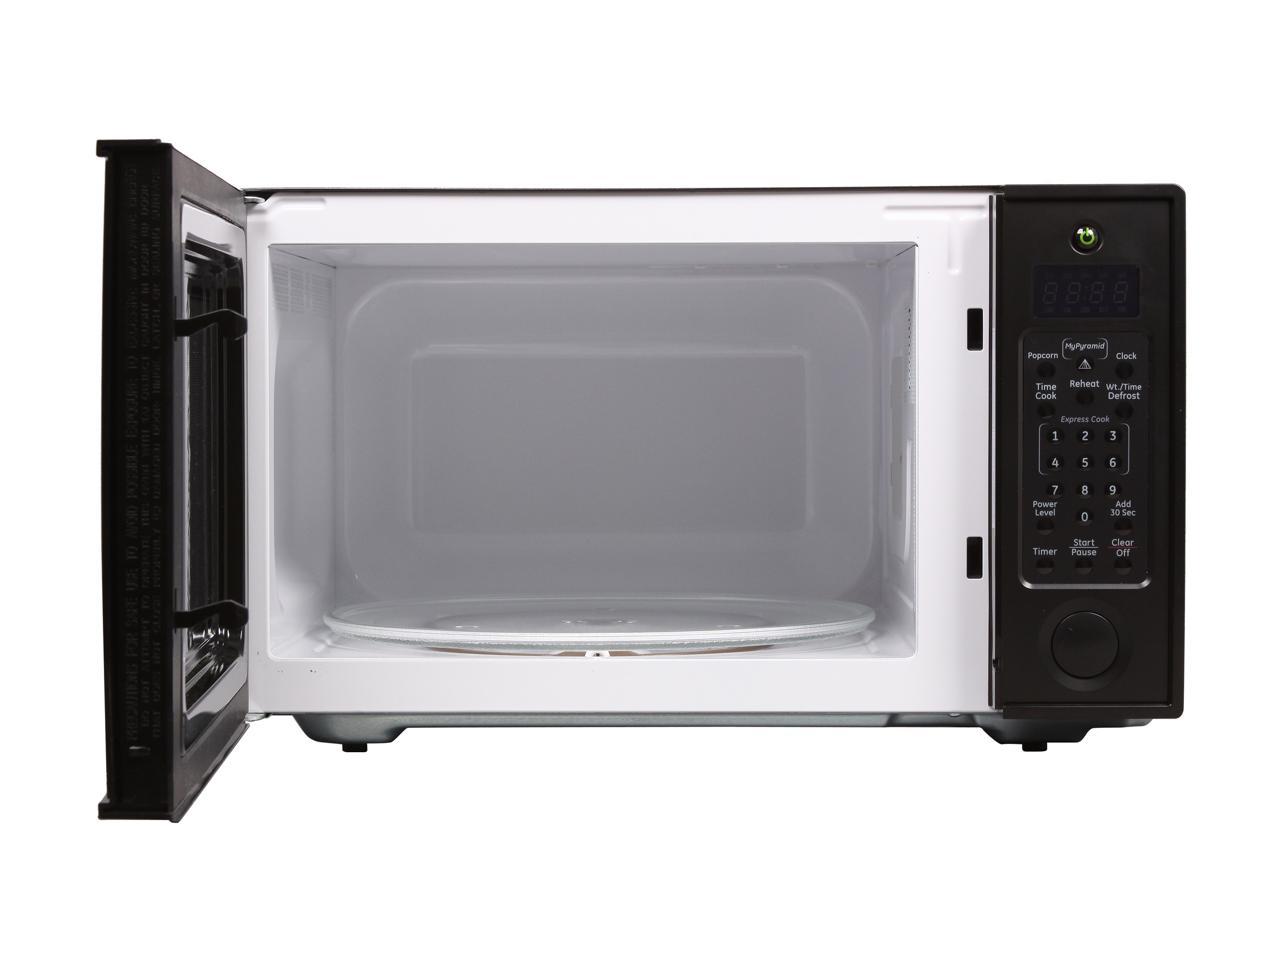 8 Amazing 1.6 Cu. Ft. Microwave Oven